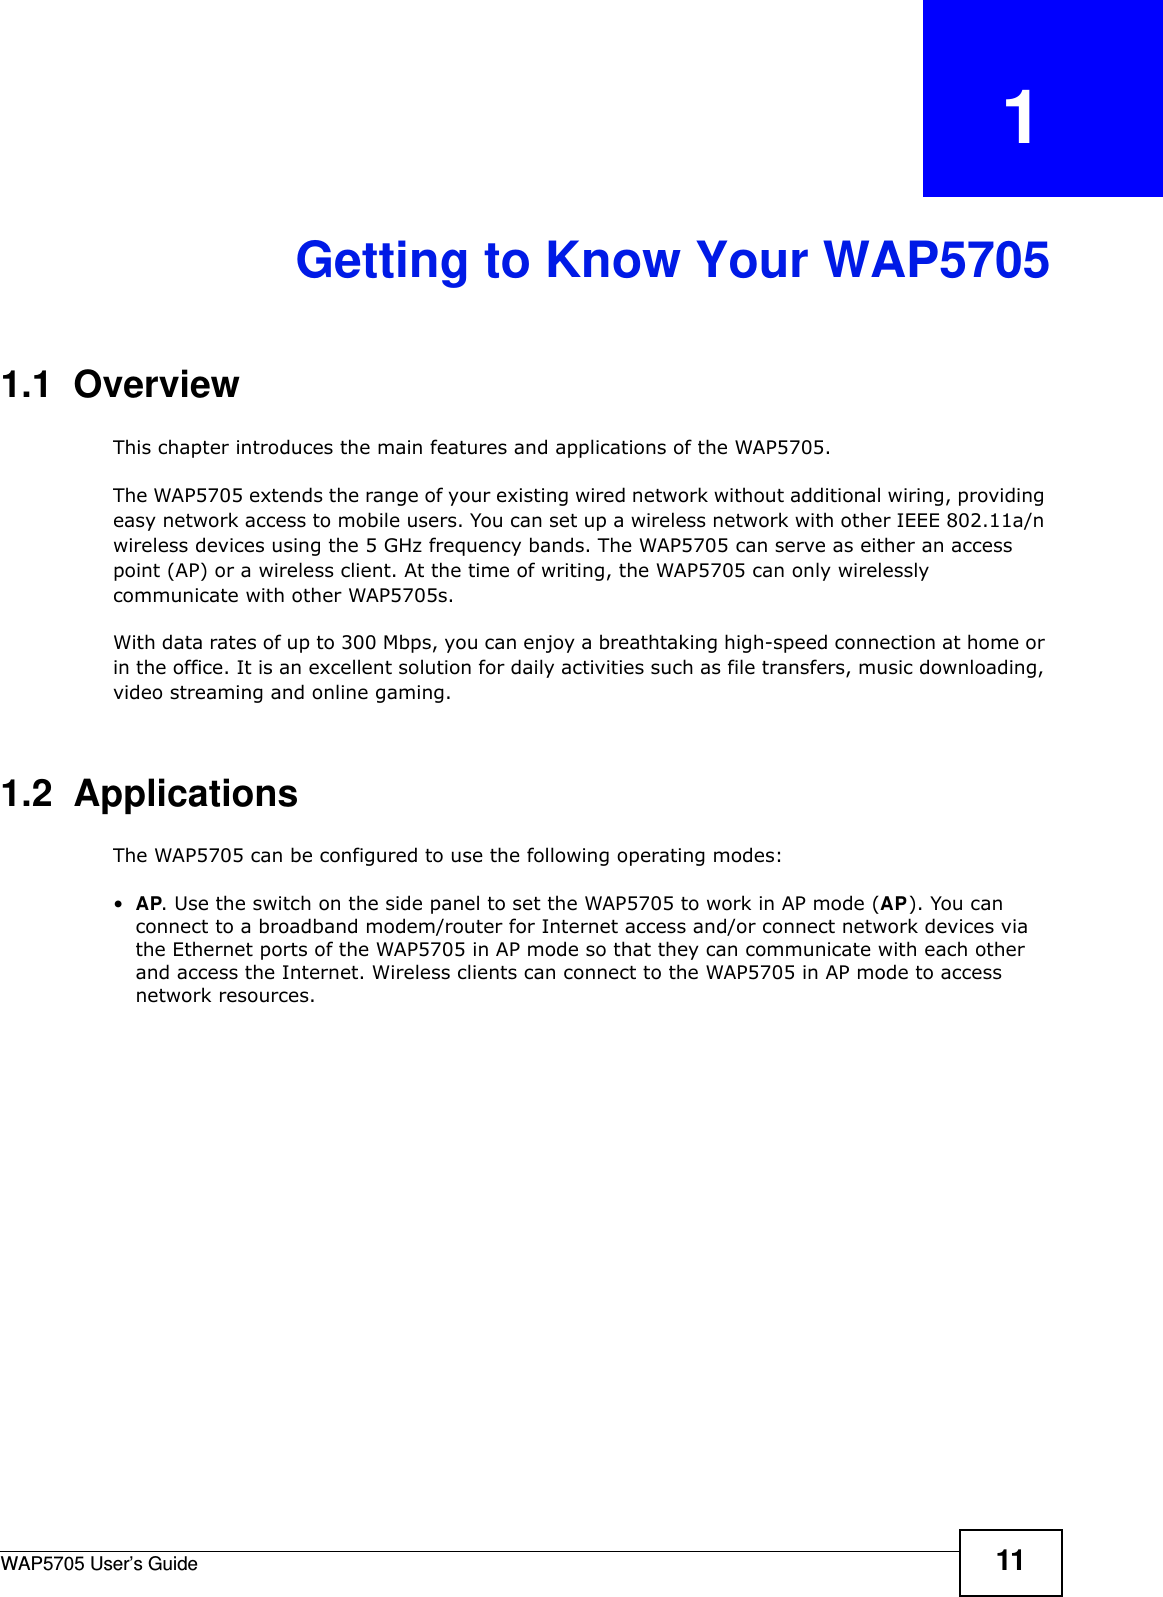 WAP5705 User’s Guide 11CHAPTER   1Getting to Know Your WAP57051.1  Overview  This chapter introduces the main features and applications of the WAP5705.The WAP5705 extends the range of your existing wired network without additional wiring, providing easy network access to mobile users. You can set up a wireless network with other IEEE 802.11a/n wireless devices using the 5 GHz frequency bands. The WAP5705 can serve as either an access point (AP) or a wireless client. At the time of writing, the WAP5705 can only wirelessly communicate with other WAP5705s.With data rates of up to 300 Mbps, you can enjoy a breathtaking high-speed connection at home or in the office. It is an excellent solution for daily activities such as file transfers, music downloading, video streaming and online gaming.1.2  Applications The WAP5705 can be configured to use the following operating modes:•AP. Use the switch on the side panel to set the WAP5705 to work in AP mode (AP). You can connect to a broadband modem/router for Internet access and/or connect network devices via the Ethernet ports of the WAP5705 in AP mode so that they can communicate with each other and access the Internet. Wireless clients can connect to the WAP5705 in AP mode to access network resources. 